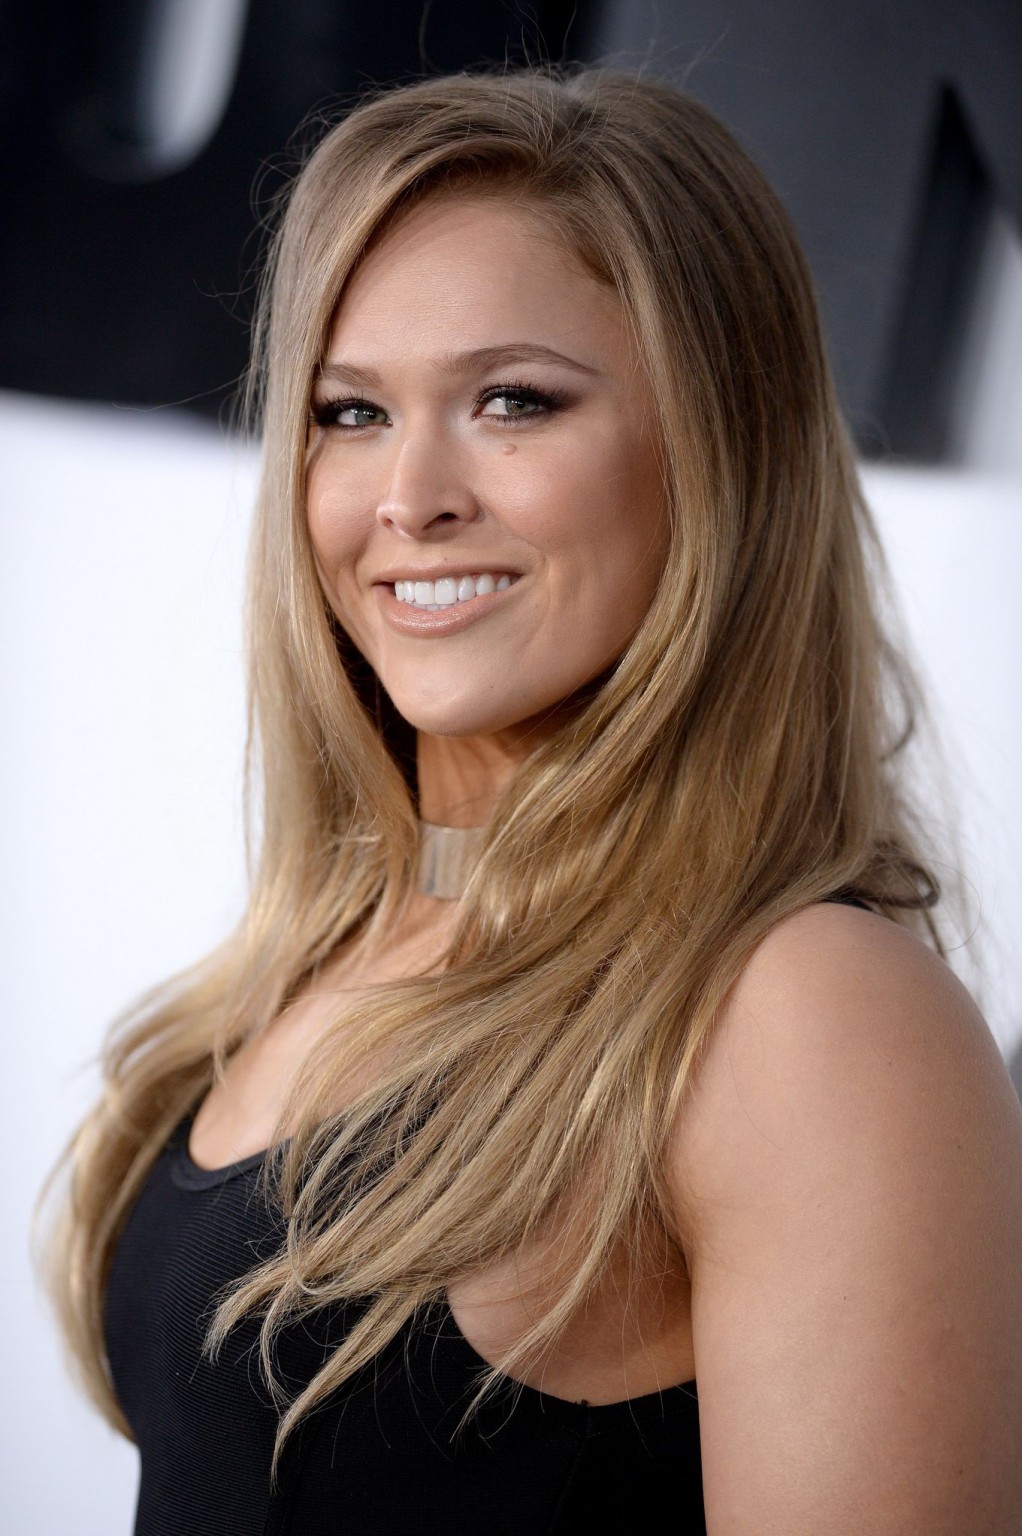 Ronda Rousey busty wearing tight black dress at the Furious 7 premiere in Hollyw #75168340